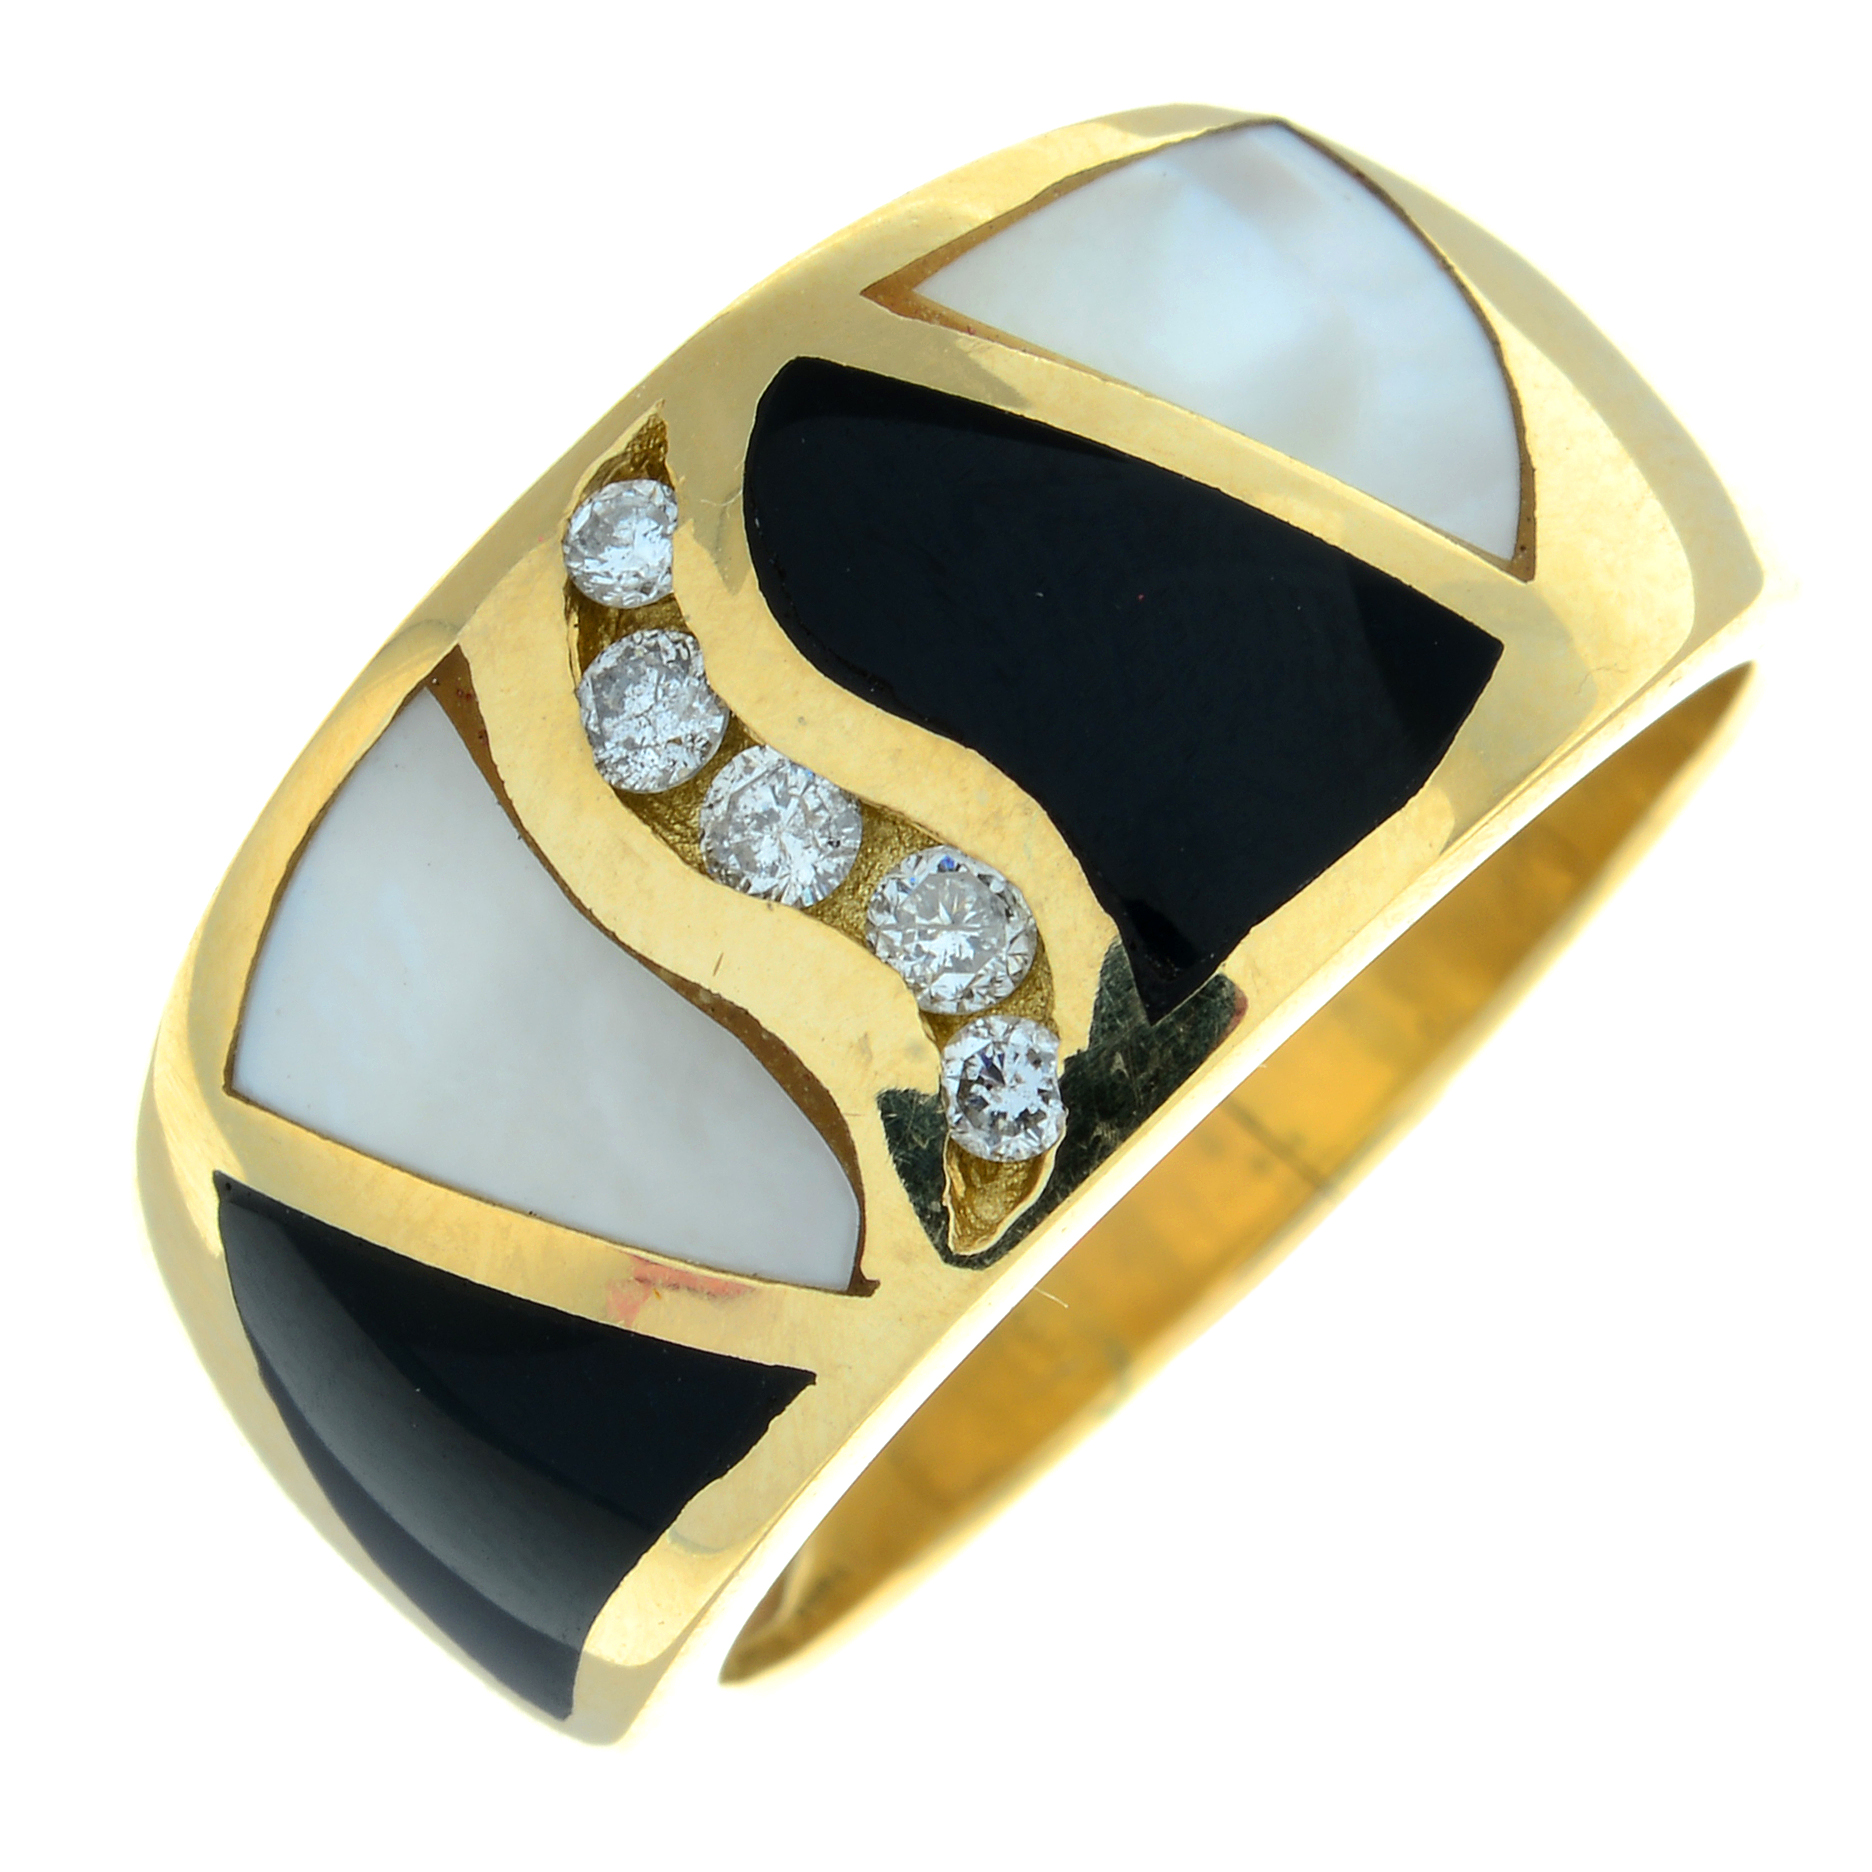 A 14ct gold mother-of-pearl, enamel and brilliant-cut diamond ring.